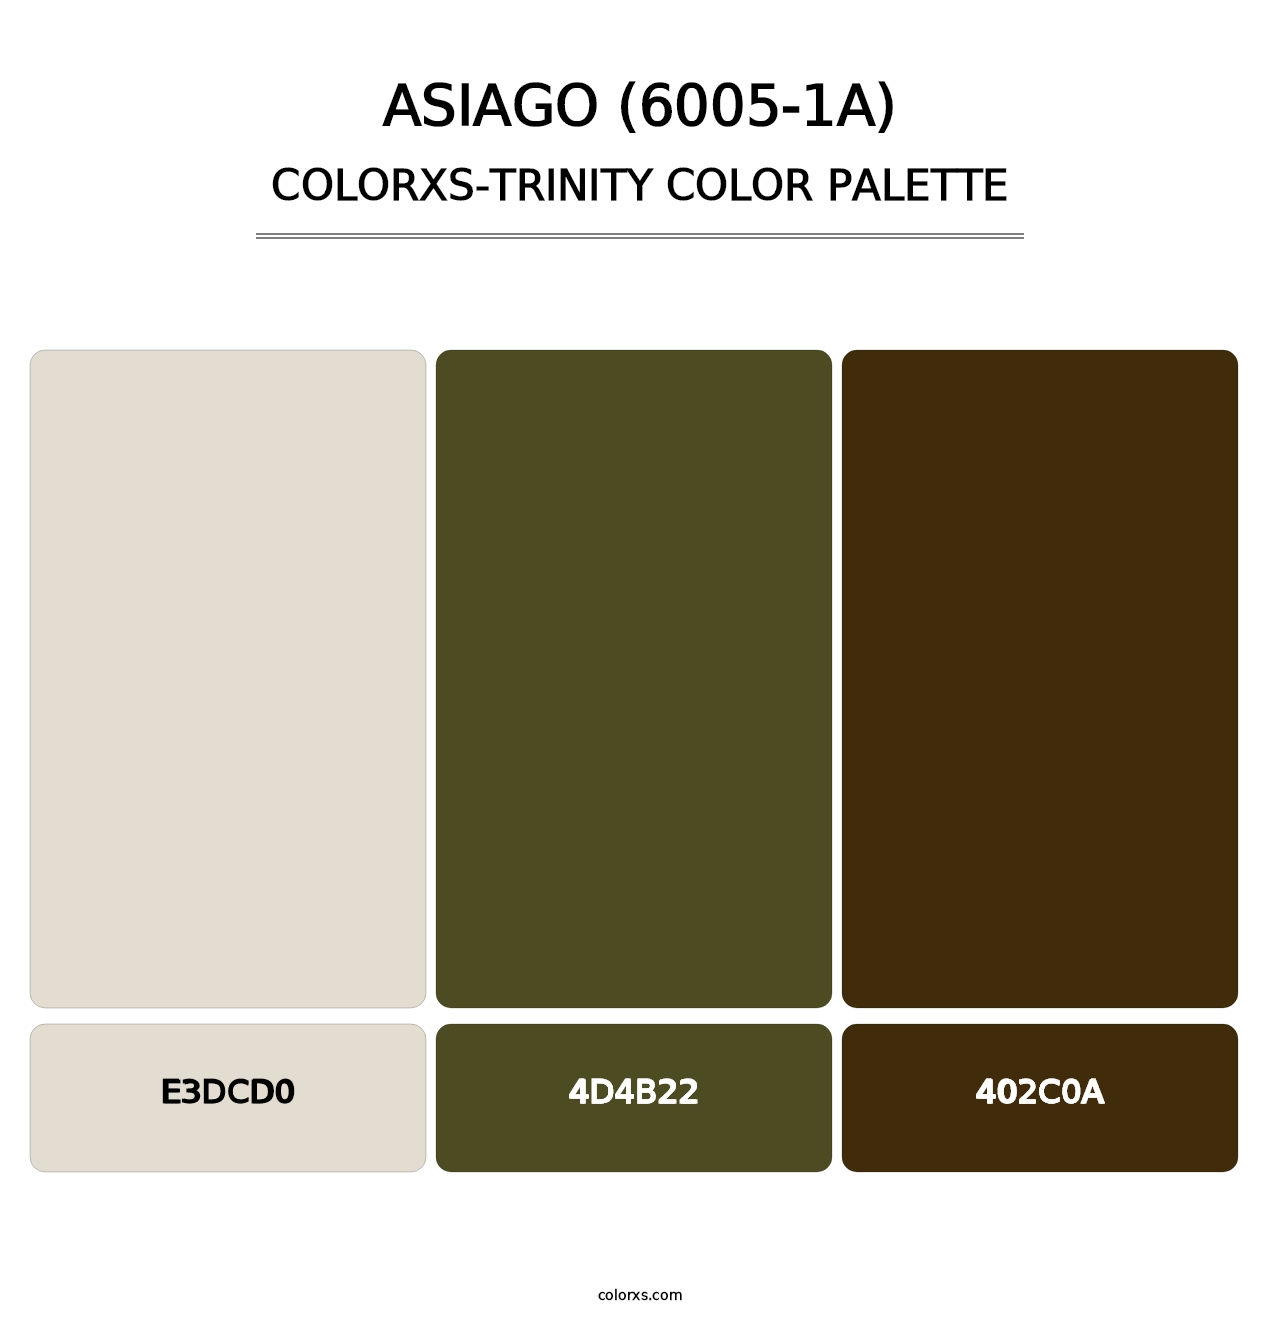 Asiago (6005-1A) - Colorxs Trinity Palette